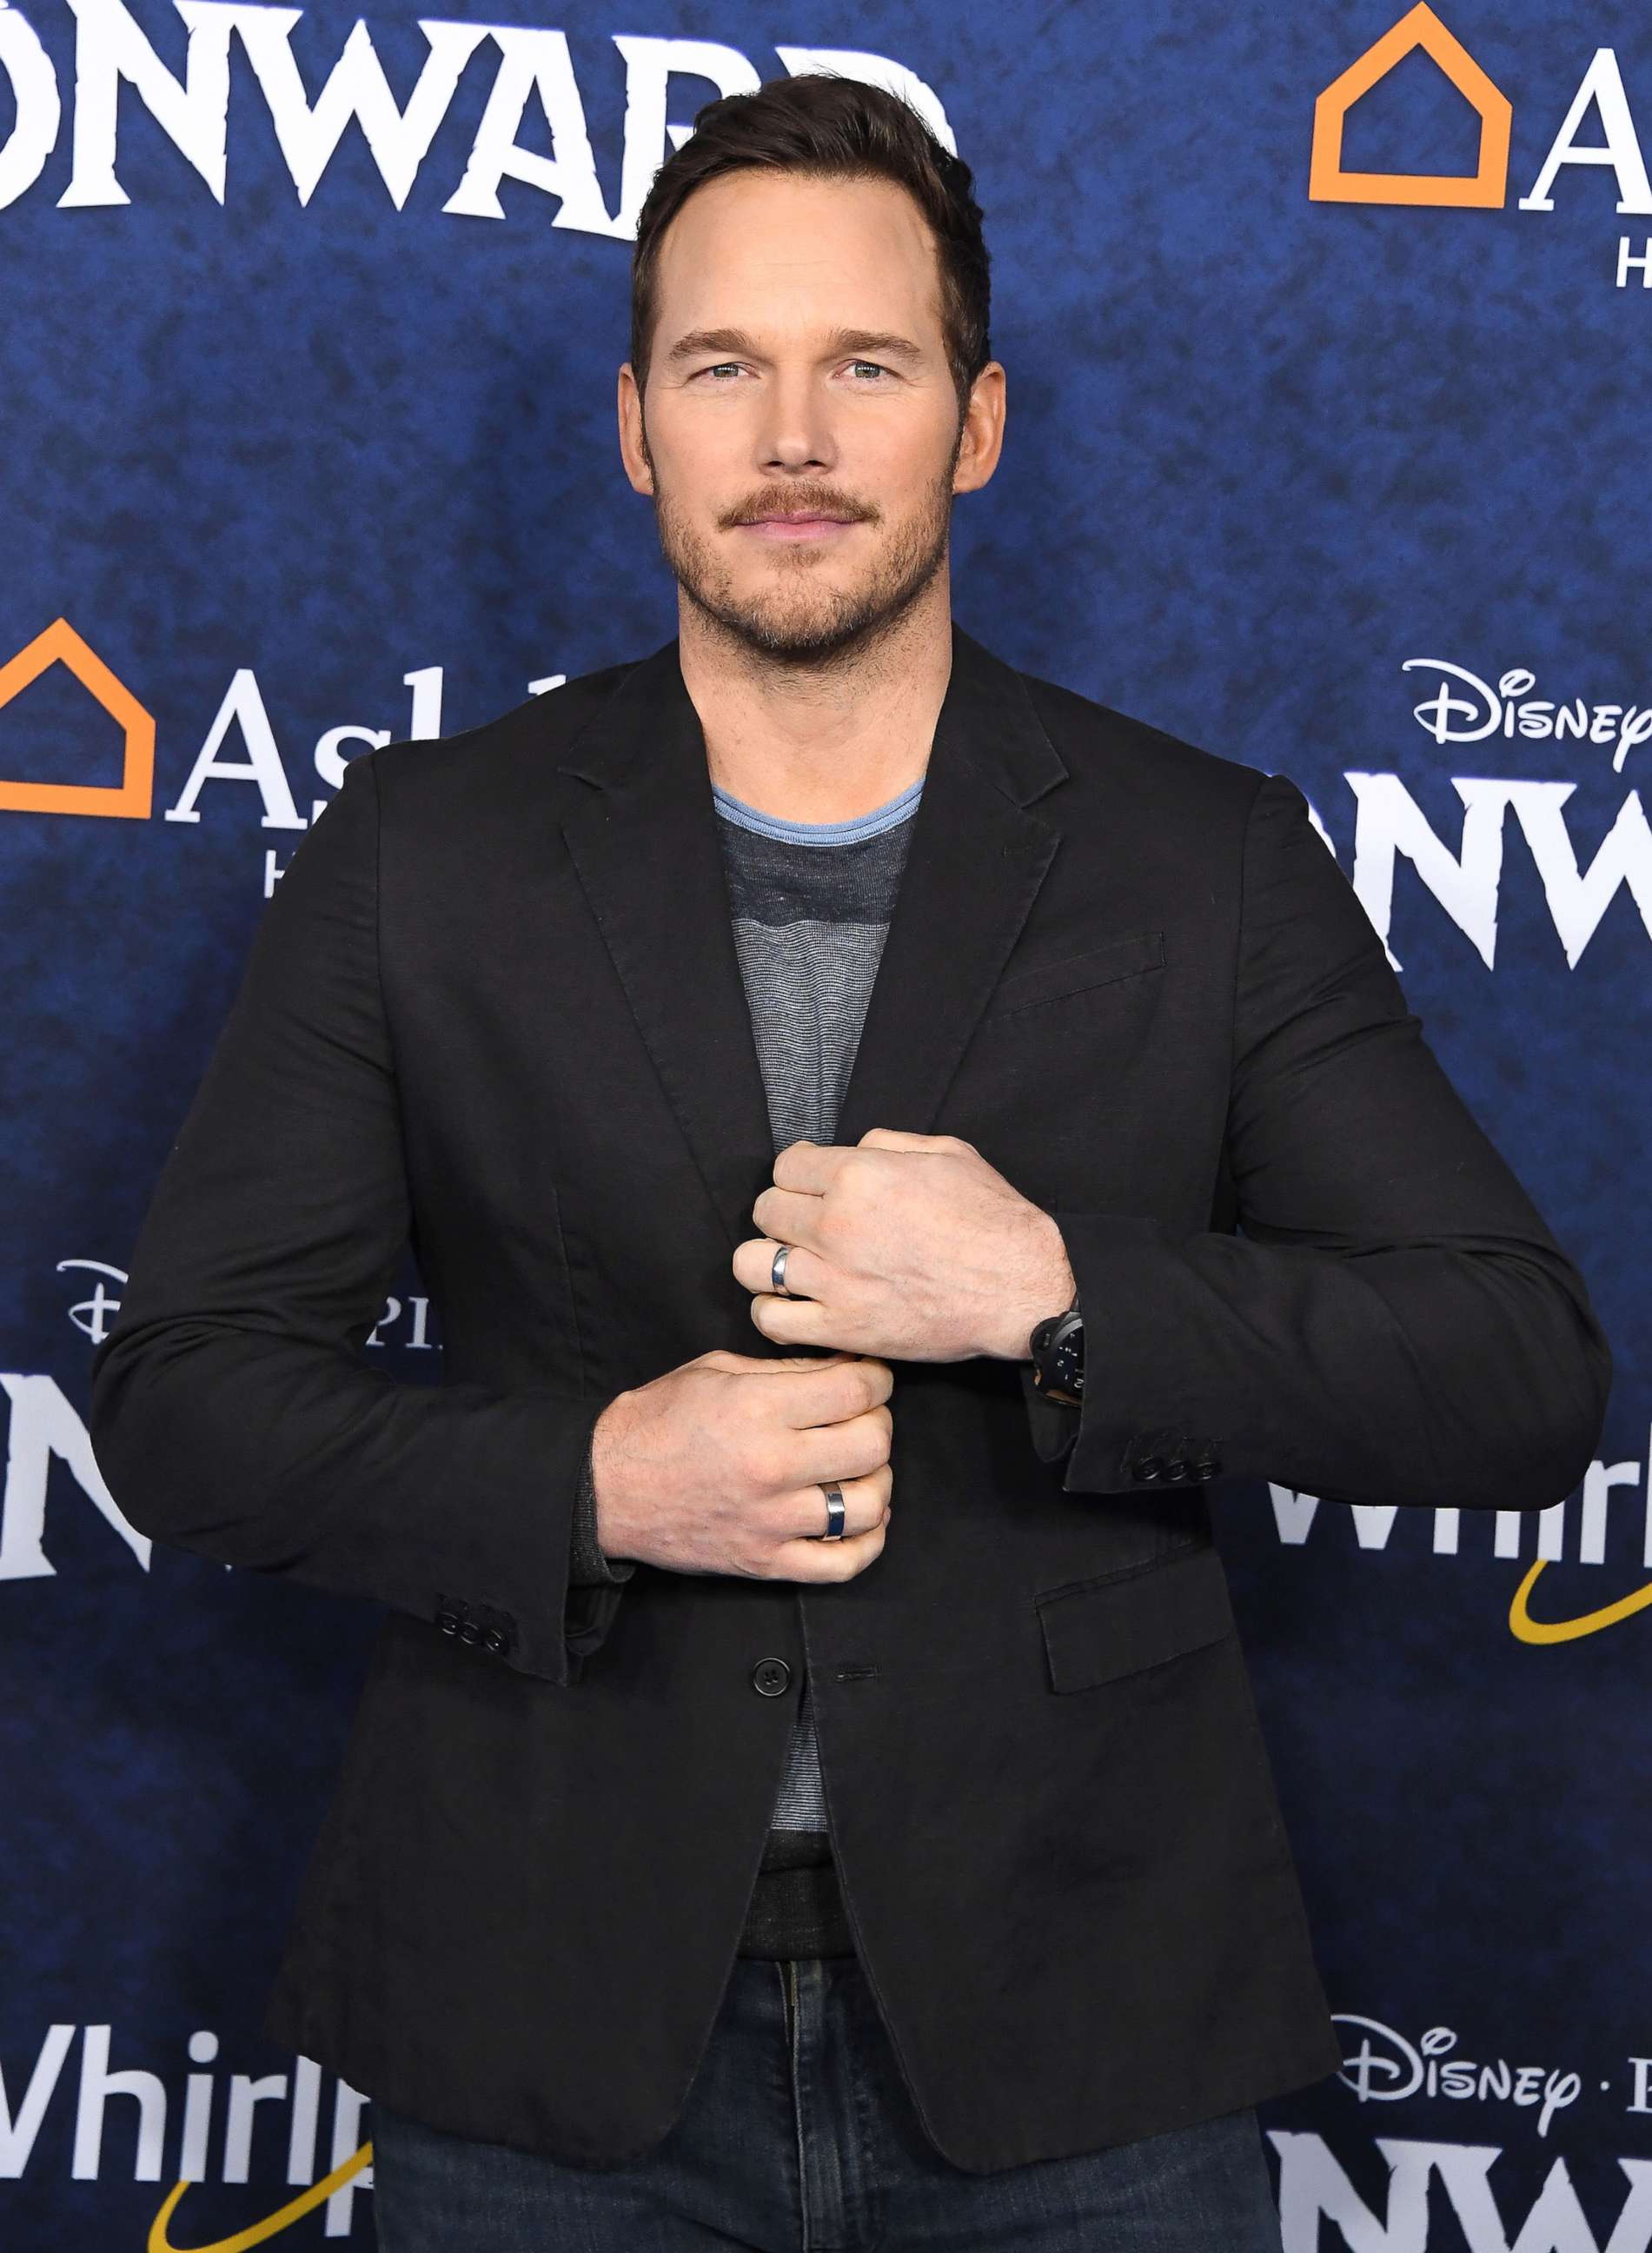 PHOTO: In this Feb. 18, 2020, file photo, Chris Pratt arrives at the Premiere Of Disney And Pixar's "Onward" in Hollywood, Calif.